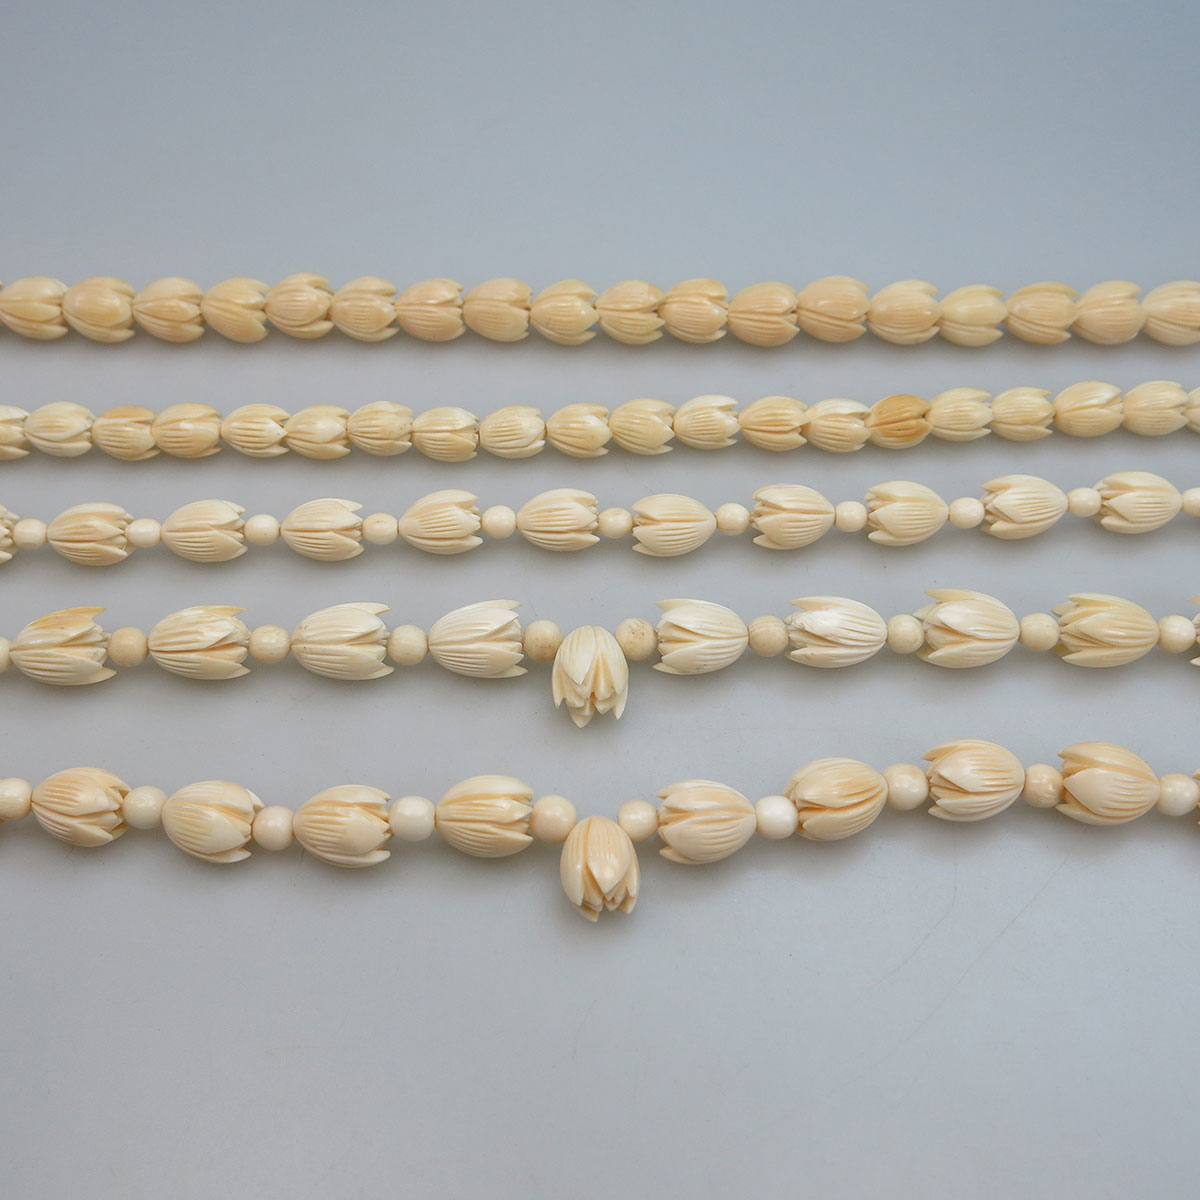 5 Carved Ivory Pikake Flower Bead Necklaces